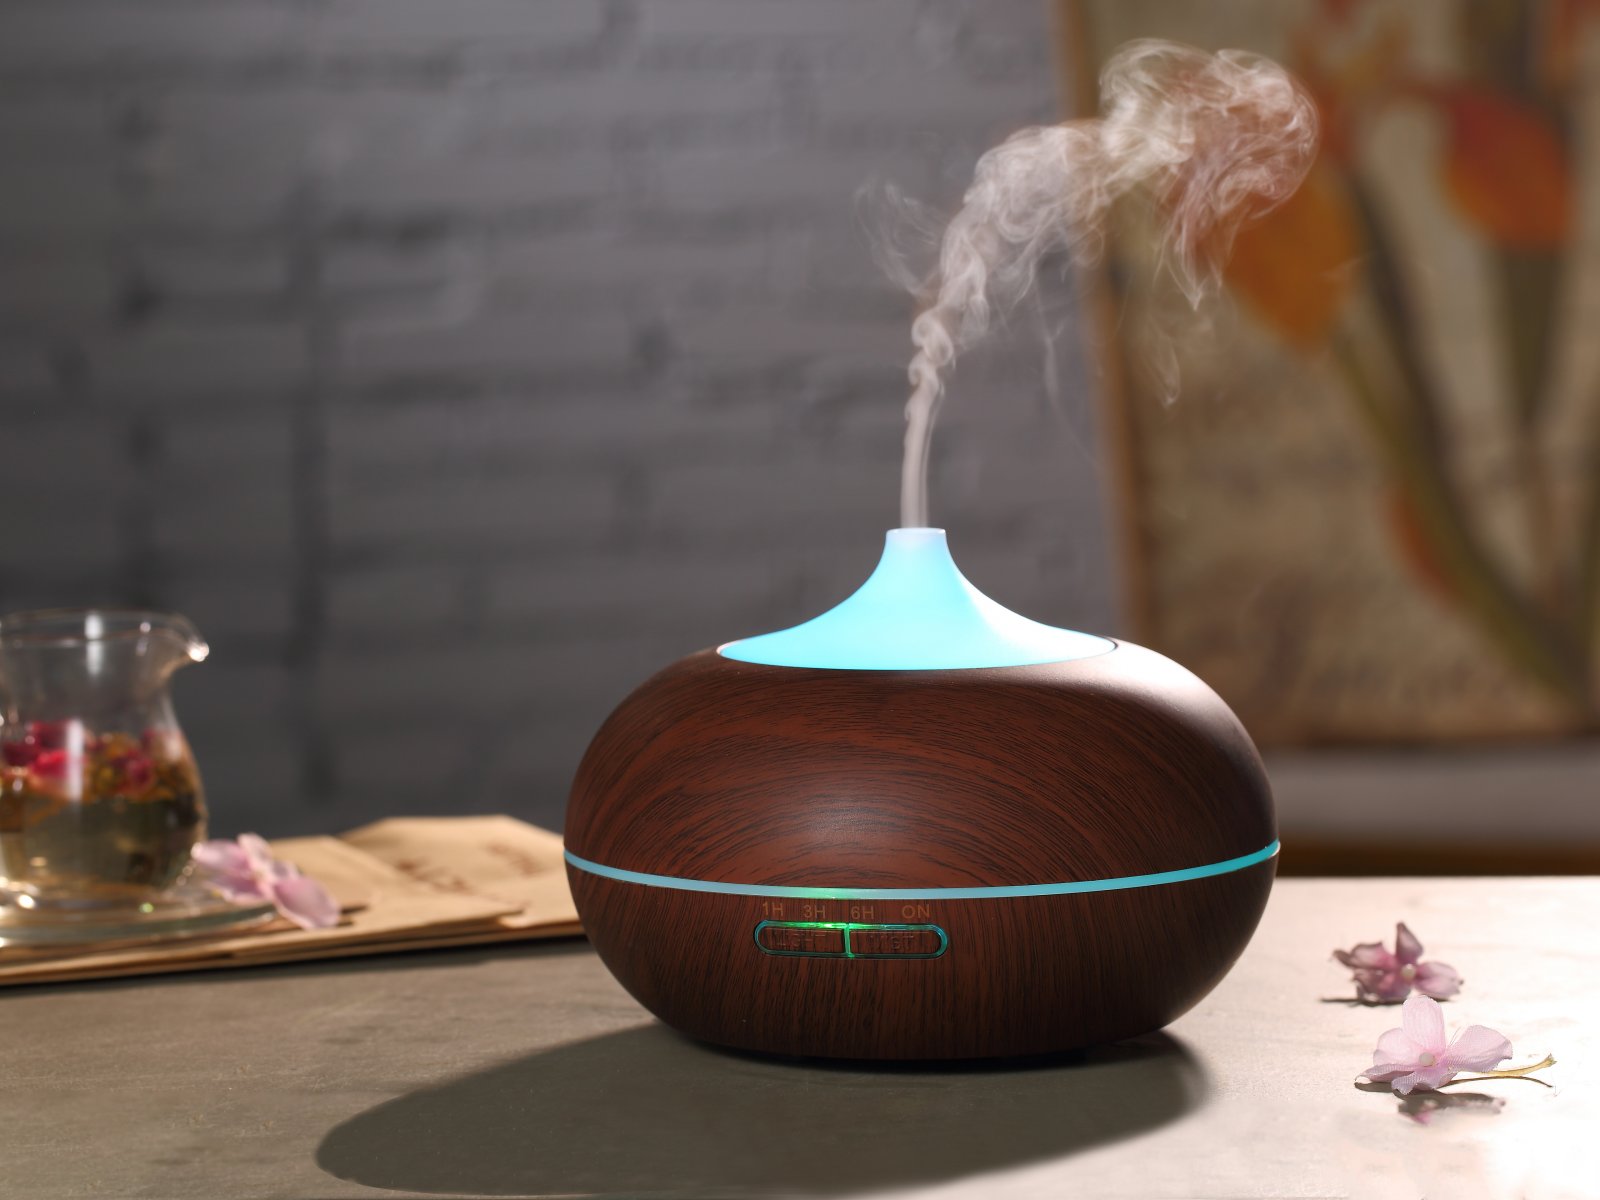 BEWIT Aroma diffuser SMELL 300, dark wood - Ultrasonic diffuser - 6